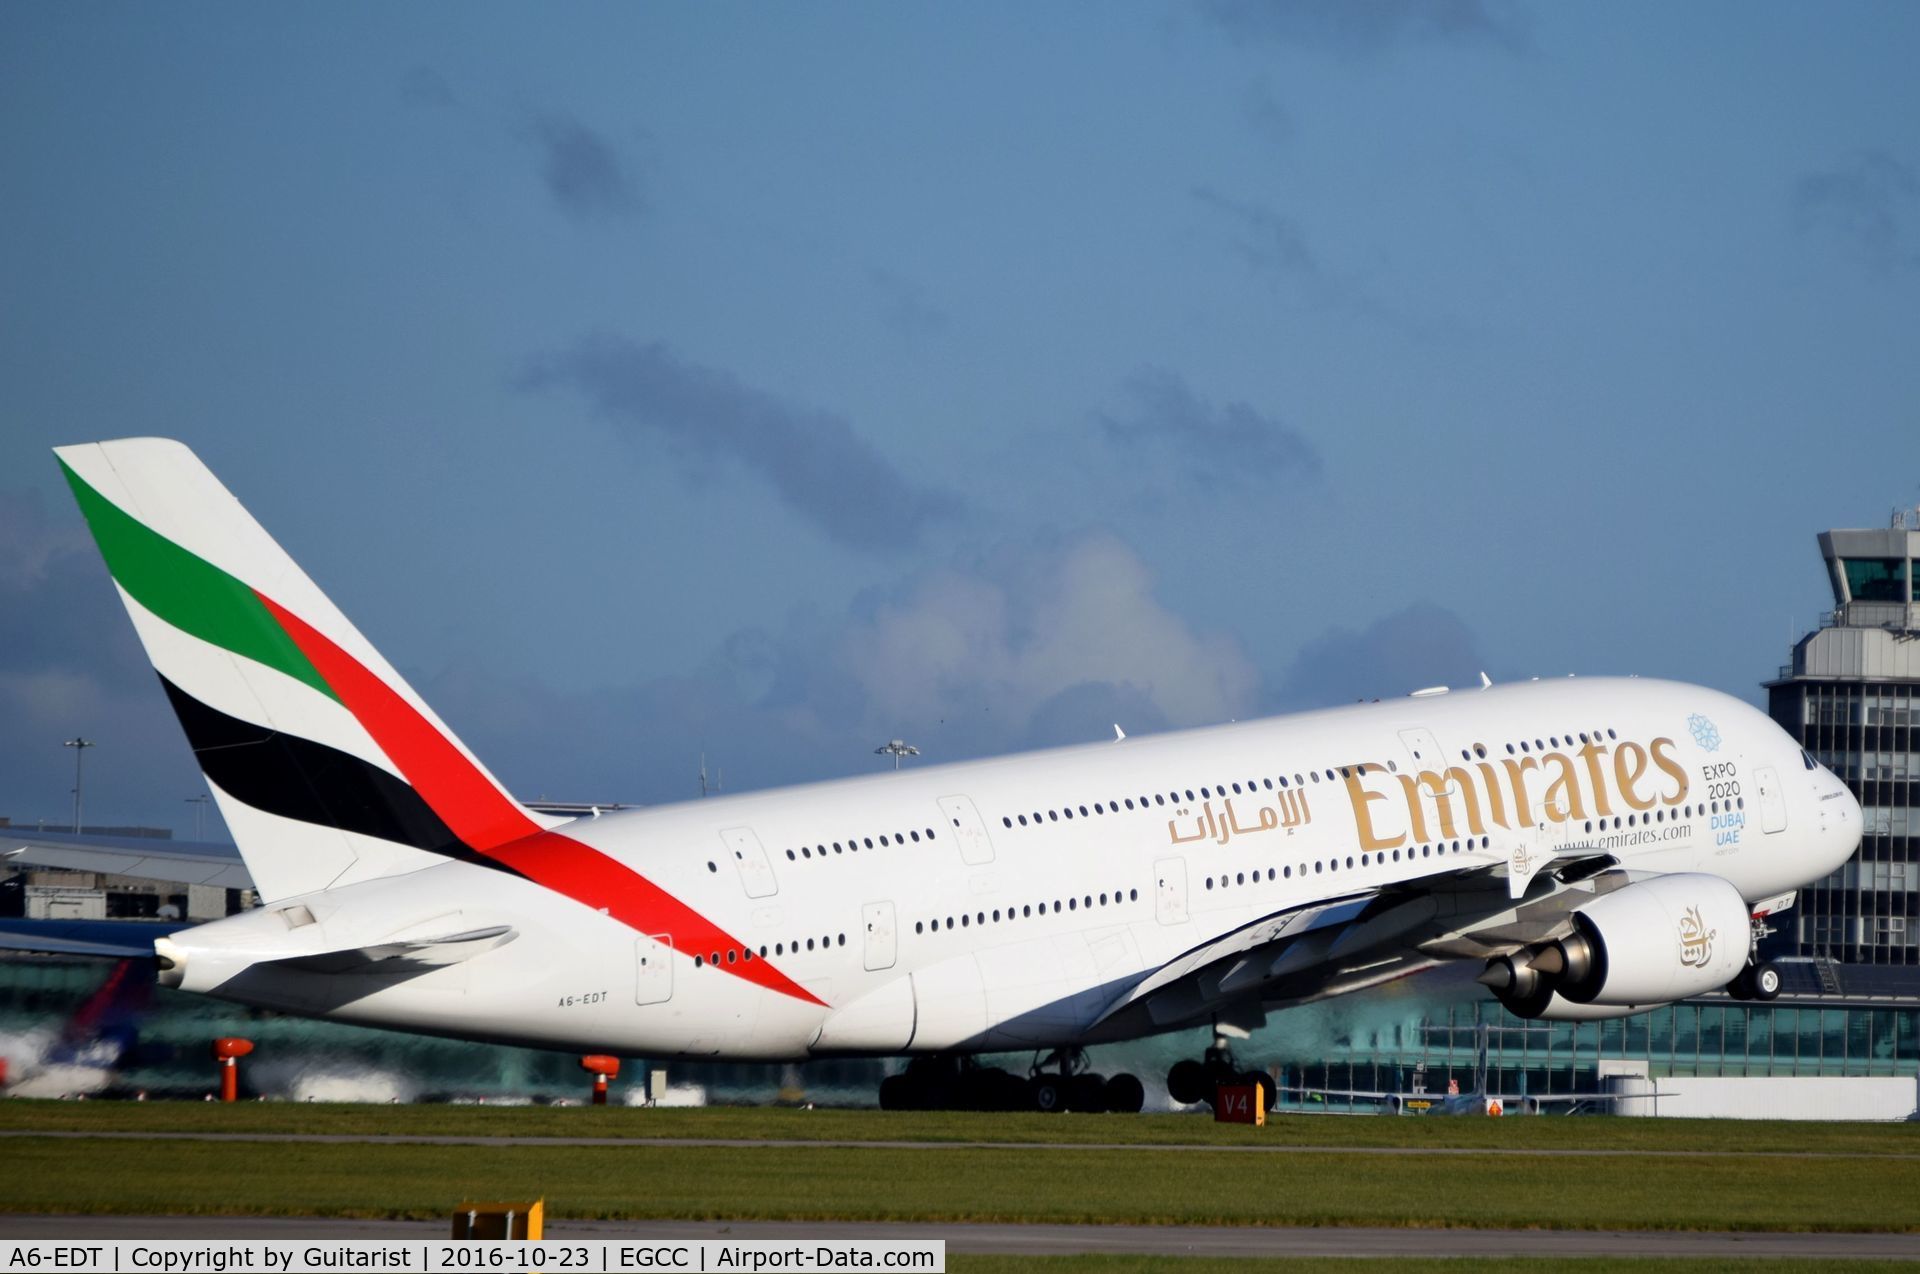 A6-EDT, 2011 Airbus A380-861 C/N 090, At Manchester